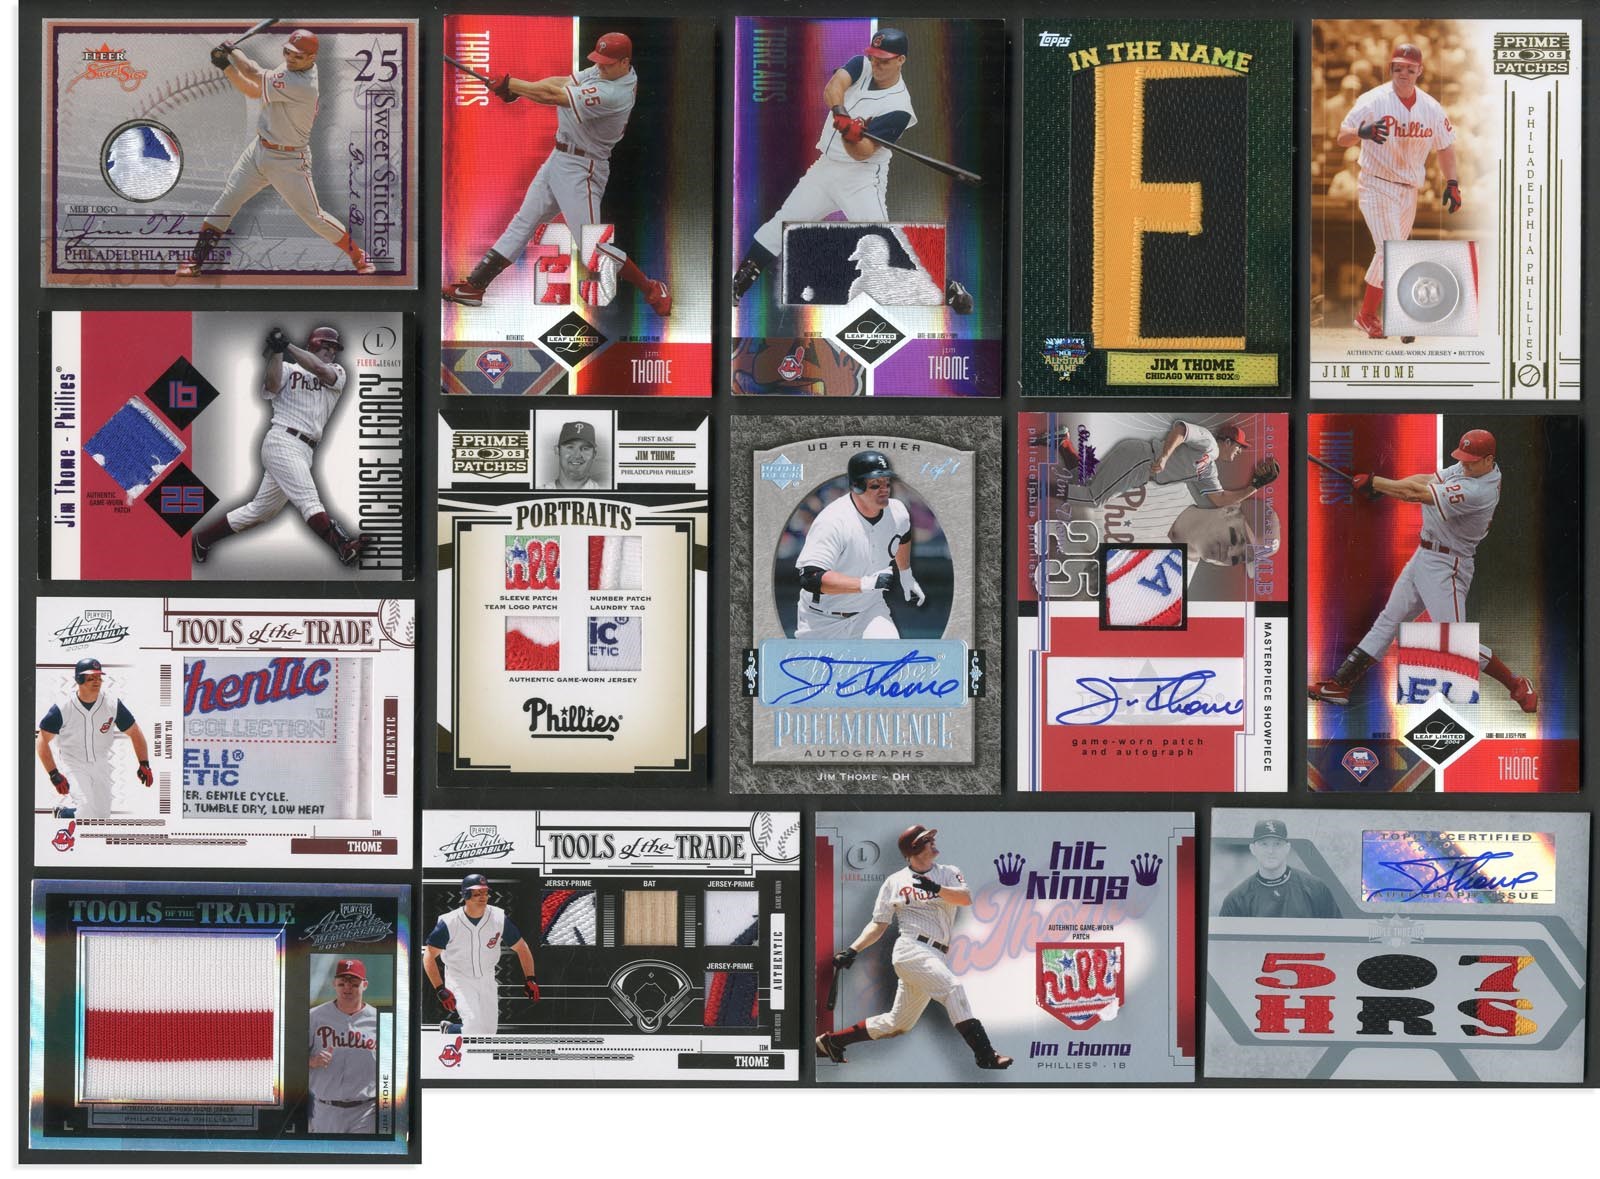 Jim Thome Master Collection - Spectacular Jim Thome "1 of 1" Memorabilia & Autograph Collection (48)